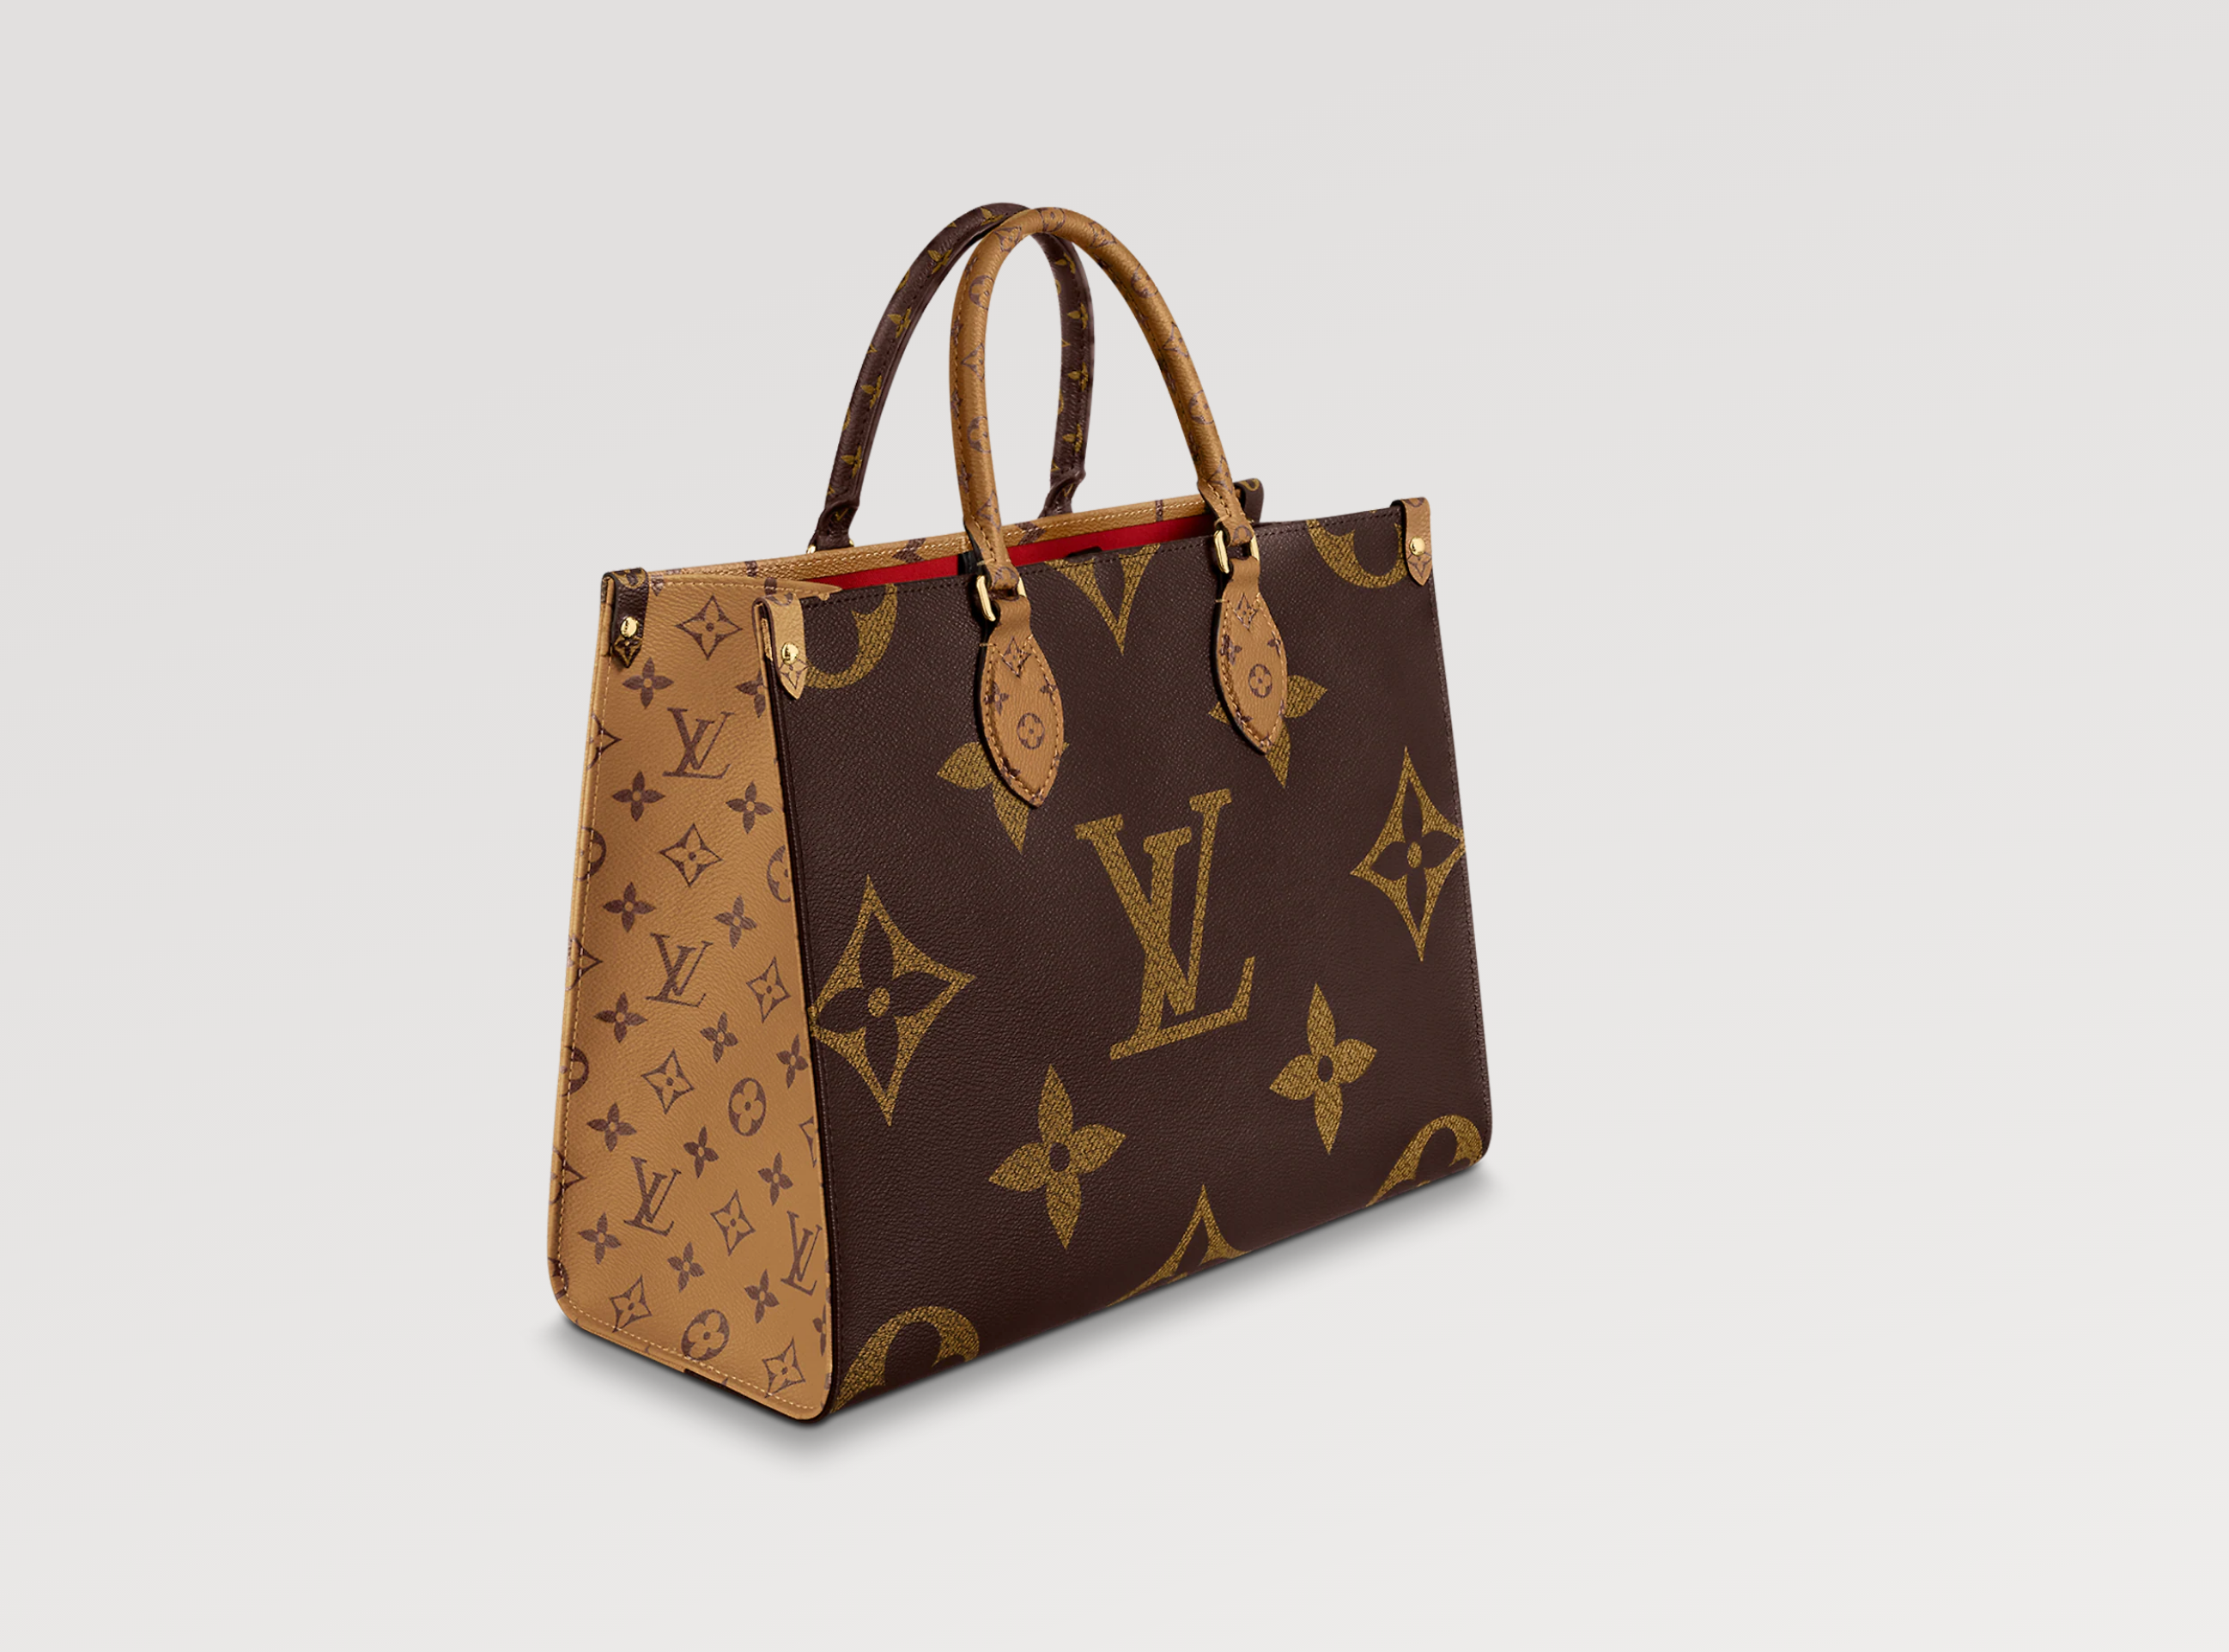 Louis Vuitton on The Go mm Coated Canvas Tote Bag,Brown